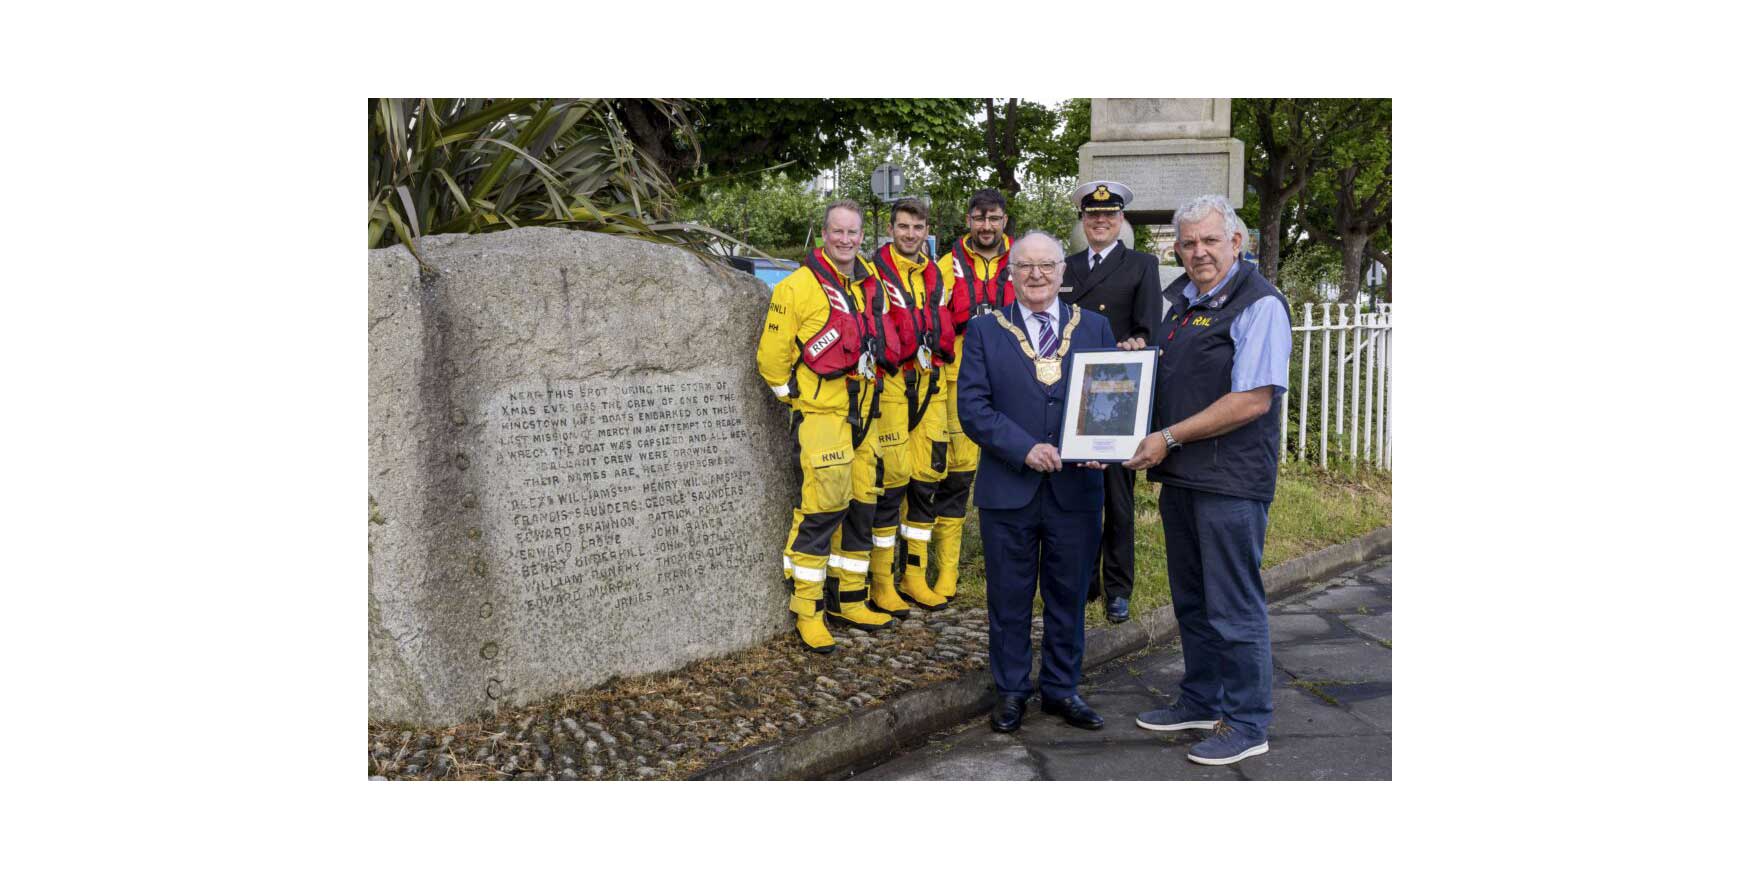 RNLI, An Cathaoirleach made a presentation to Eddie Totterdell, Lifeboat Operation Manager.